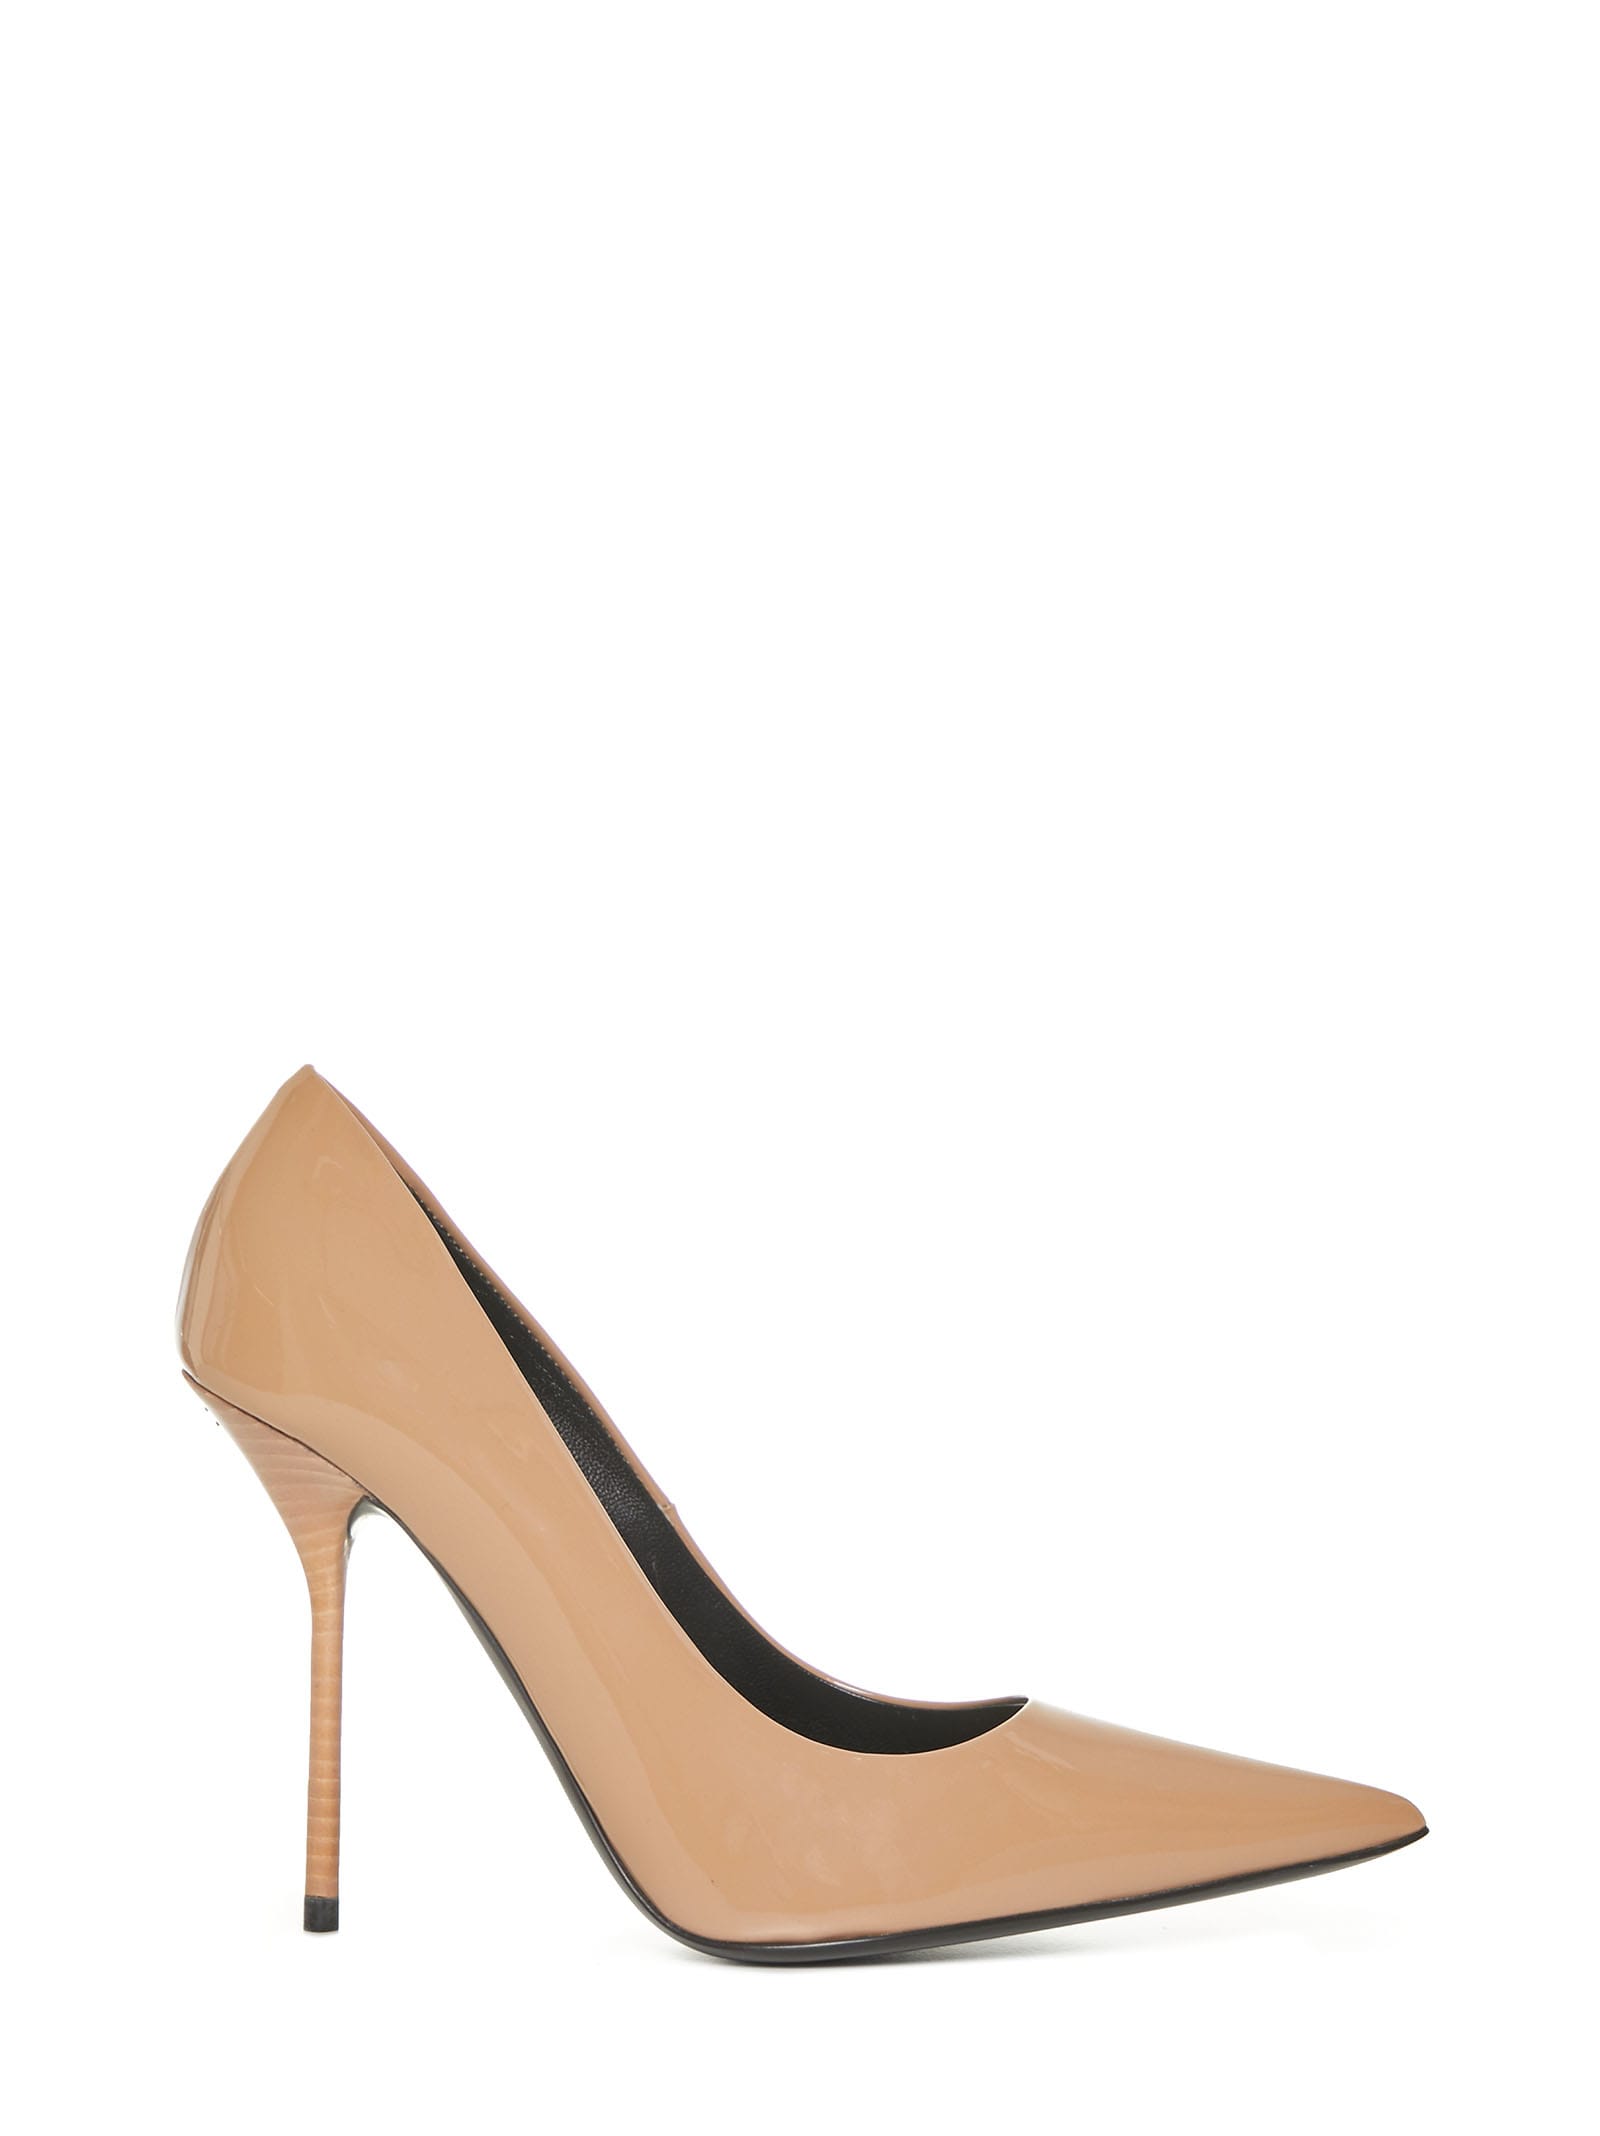 Tom Ford Pumps In Beige